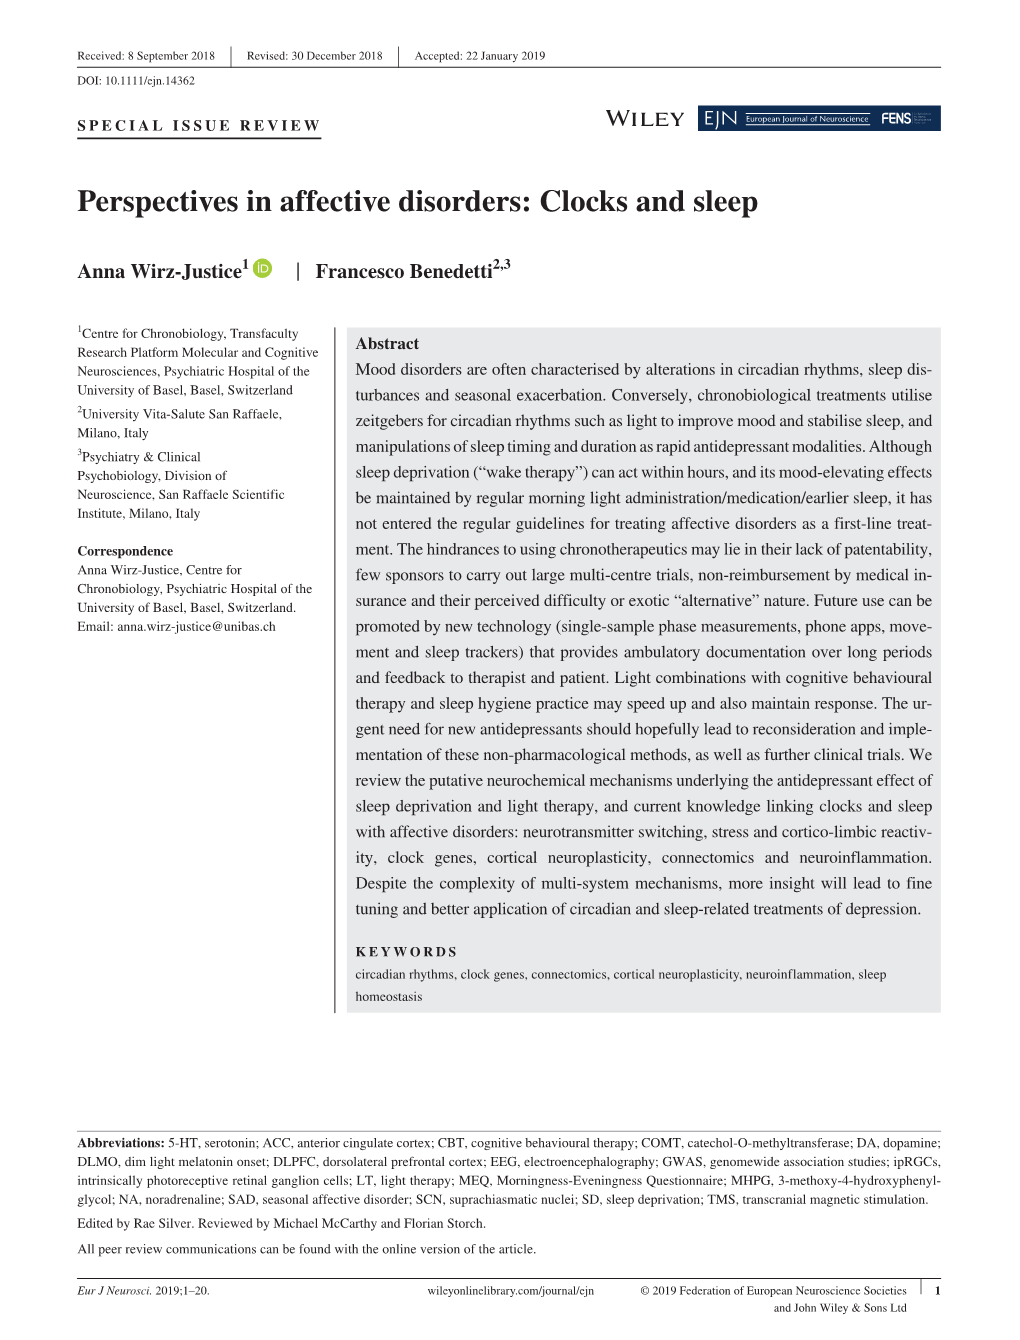 Perspectives in Affective Disorders: Clocks and Sleep